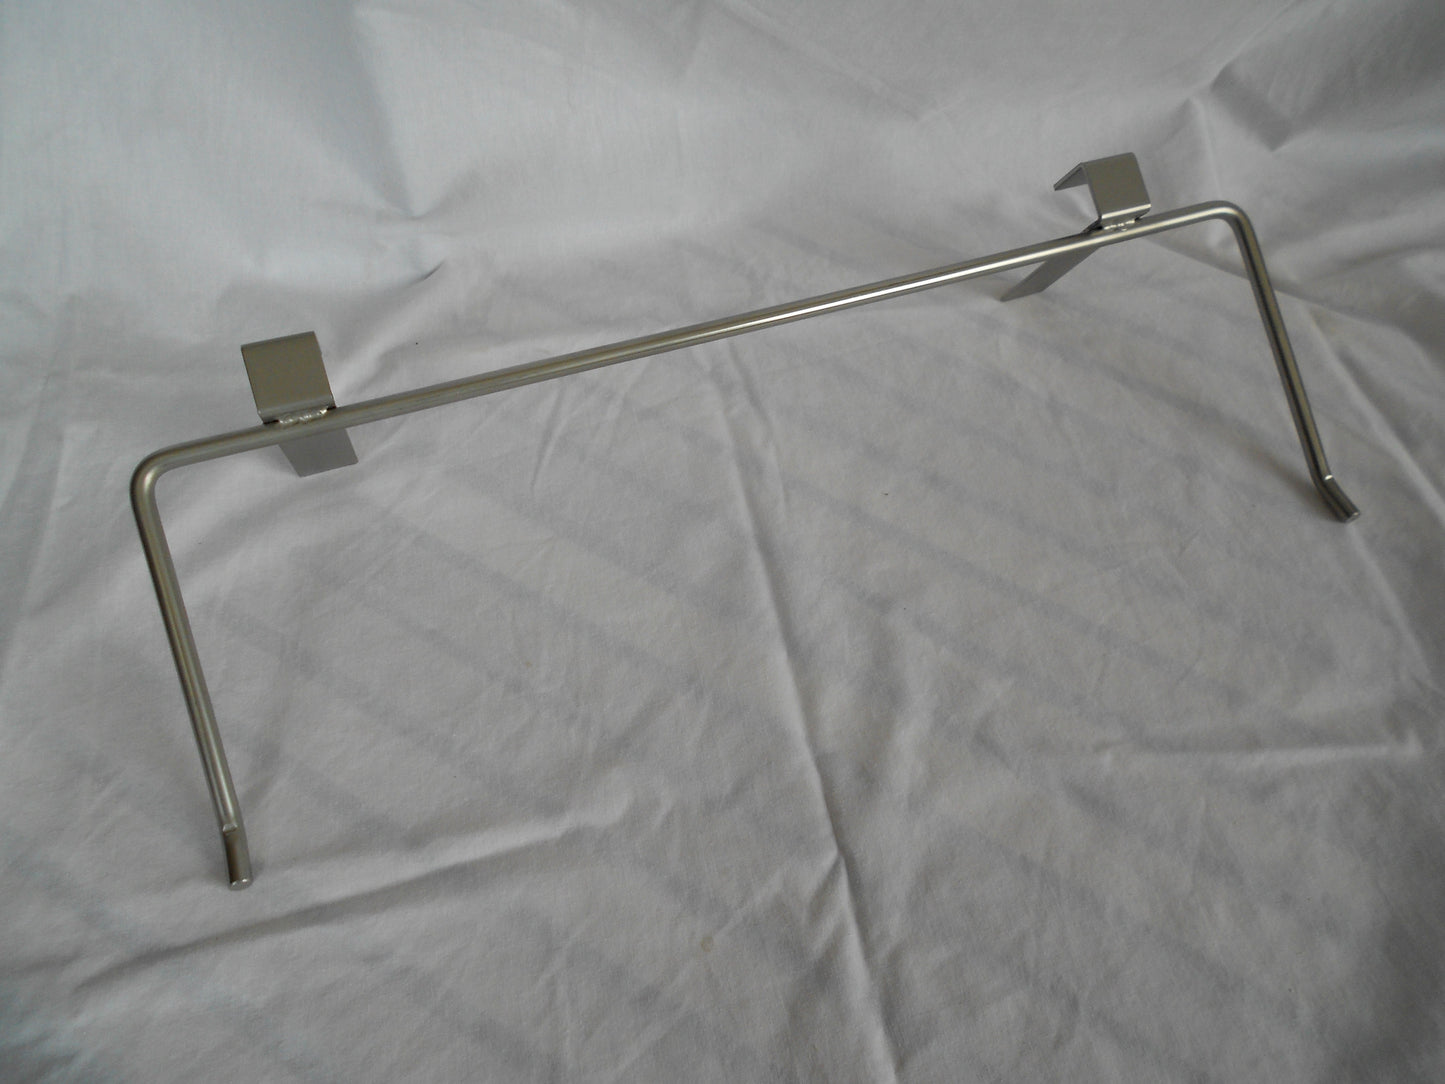 Stainless Steel Frame Perch